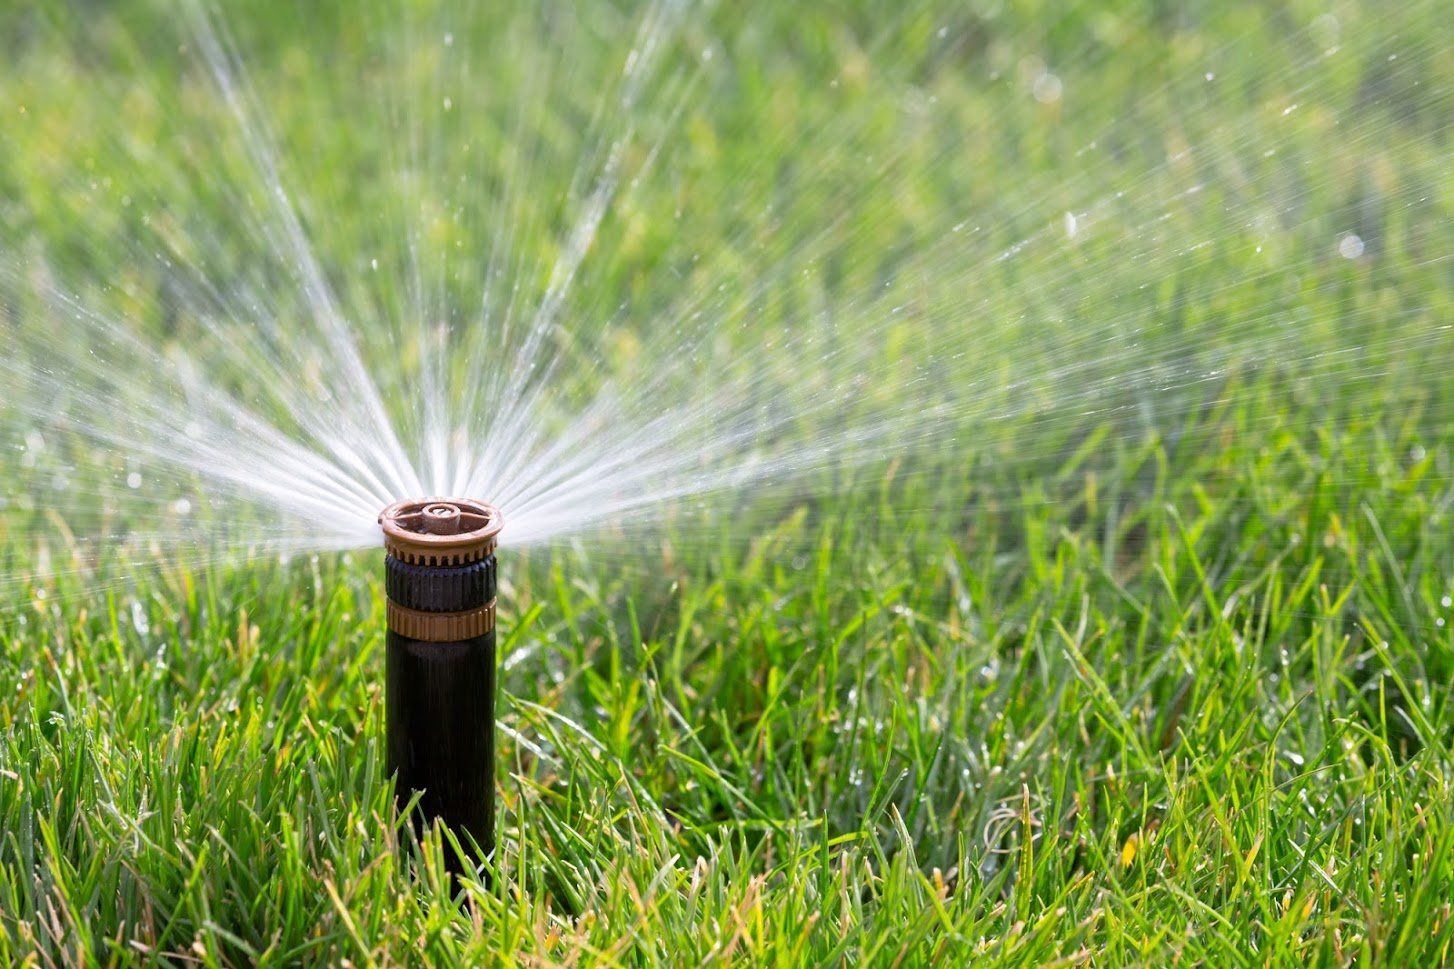 Install a Sprinkler System Before Laying Sod